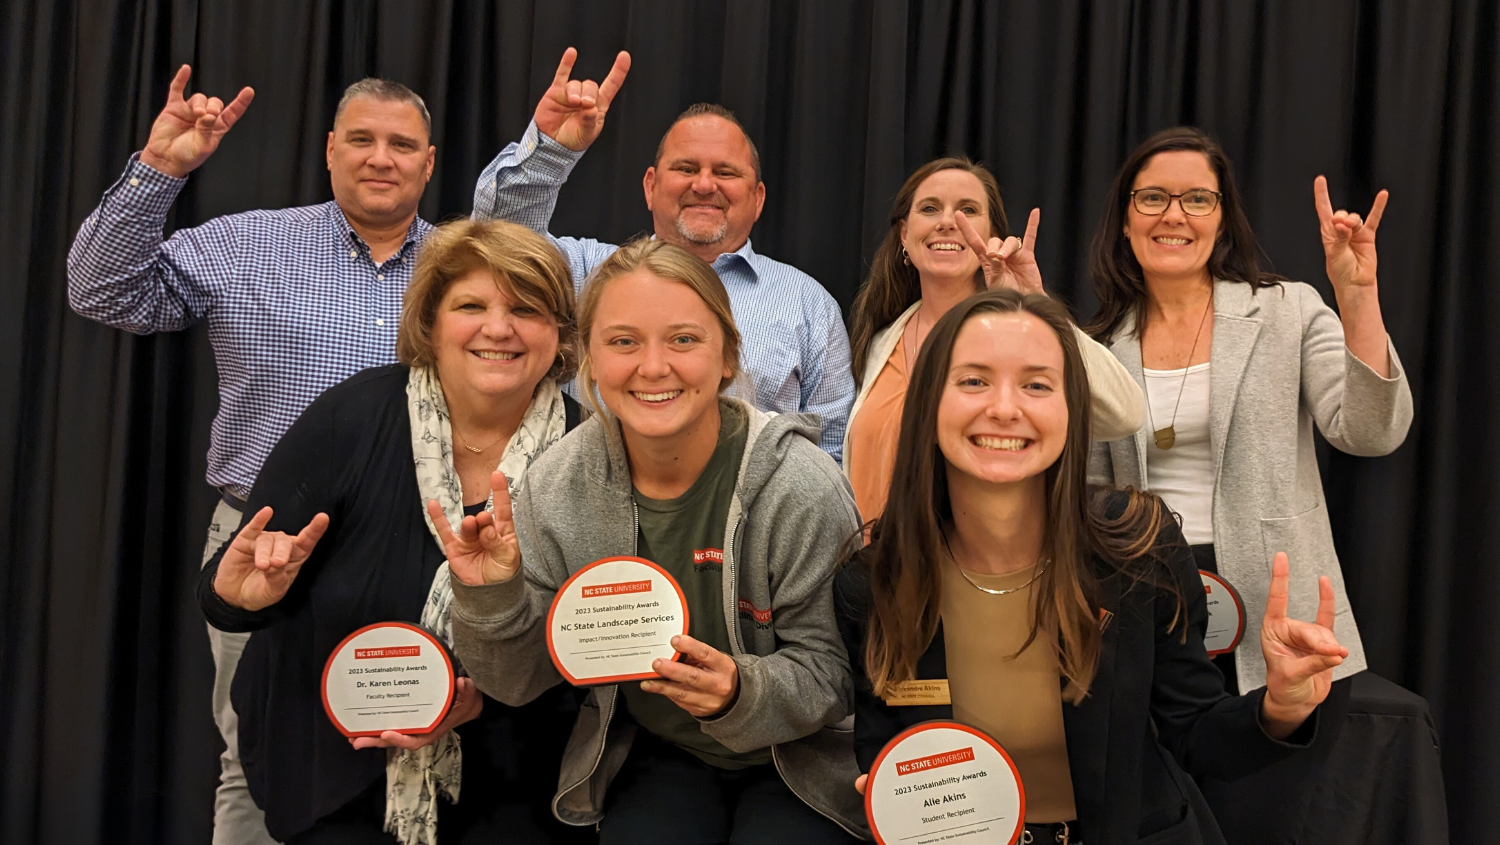 Winners of NC State's Sustainability Awards pose for a group picture while flashing the Wolf hand sign. They are standing in front of a black fabric background.